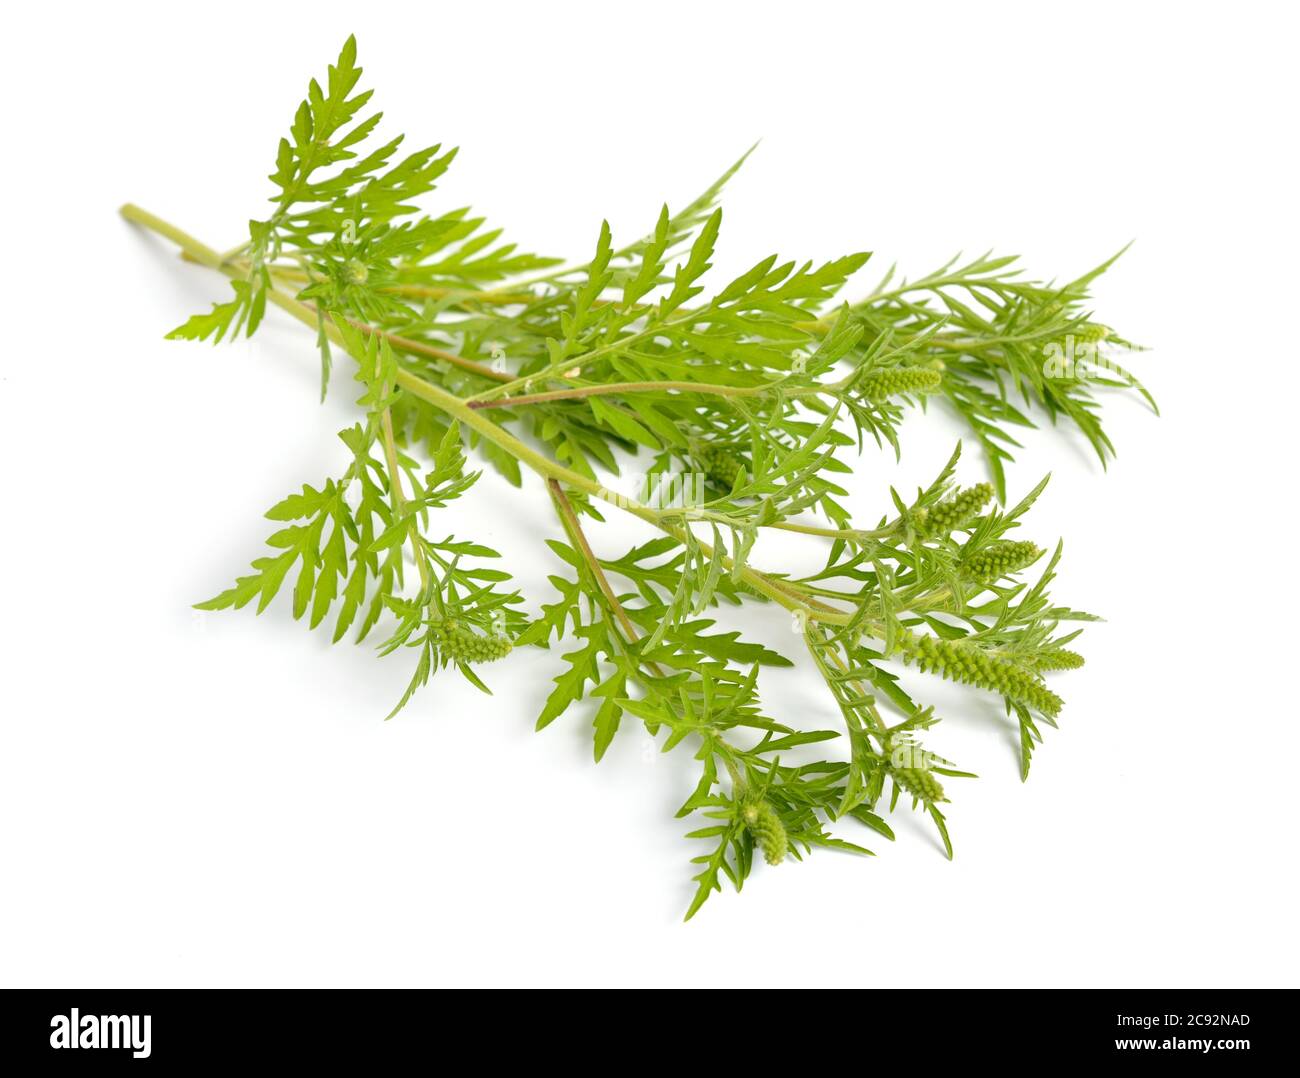 Ragweeds, Ambrosia. Other common names include bursages and burrobrushes. Isolated on white background Stock Photo